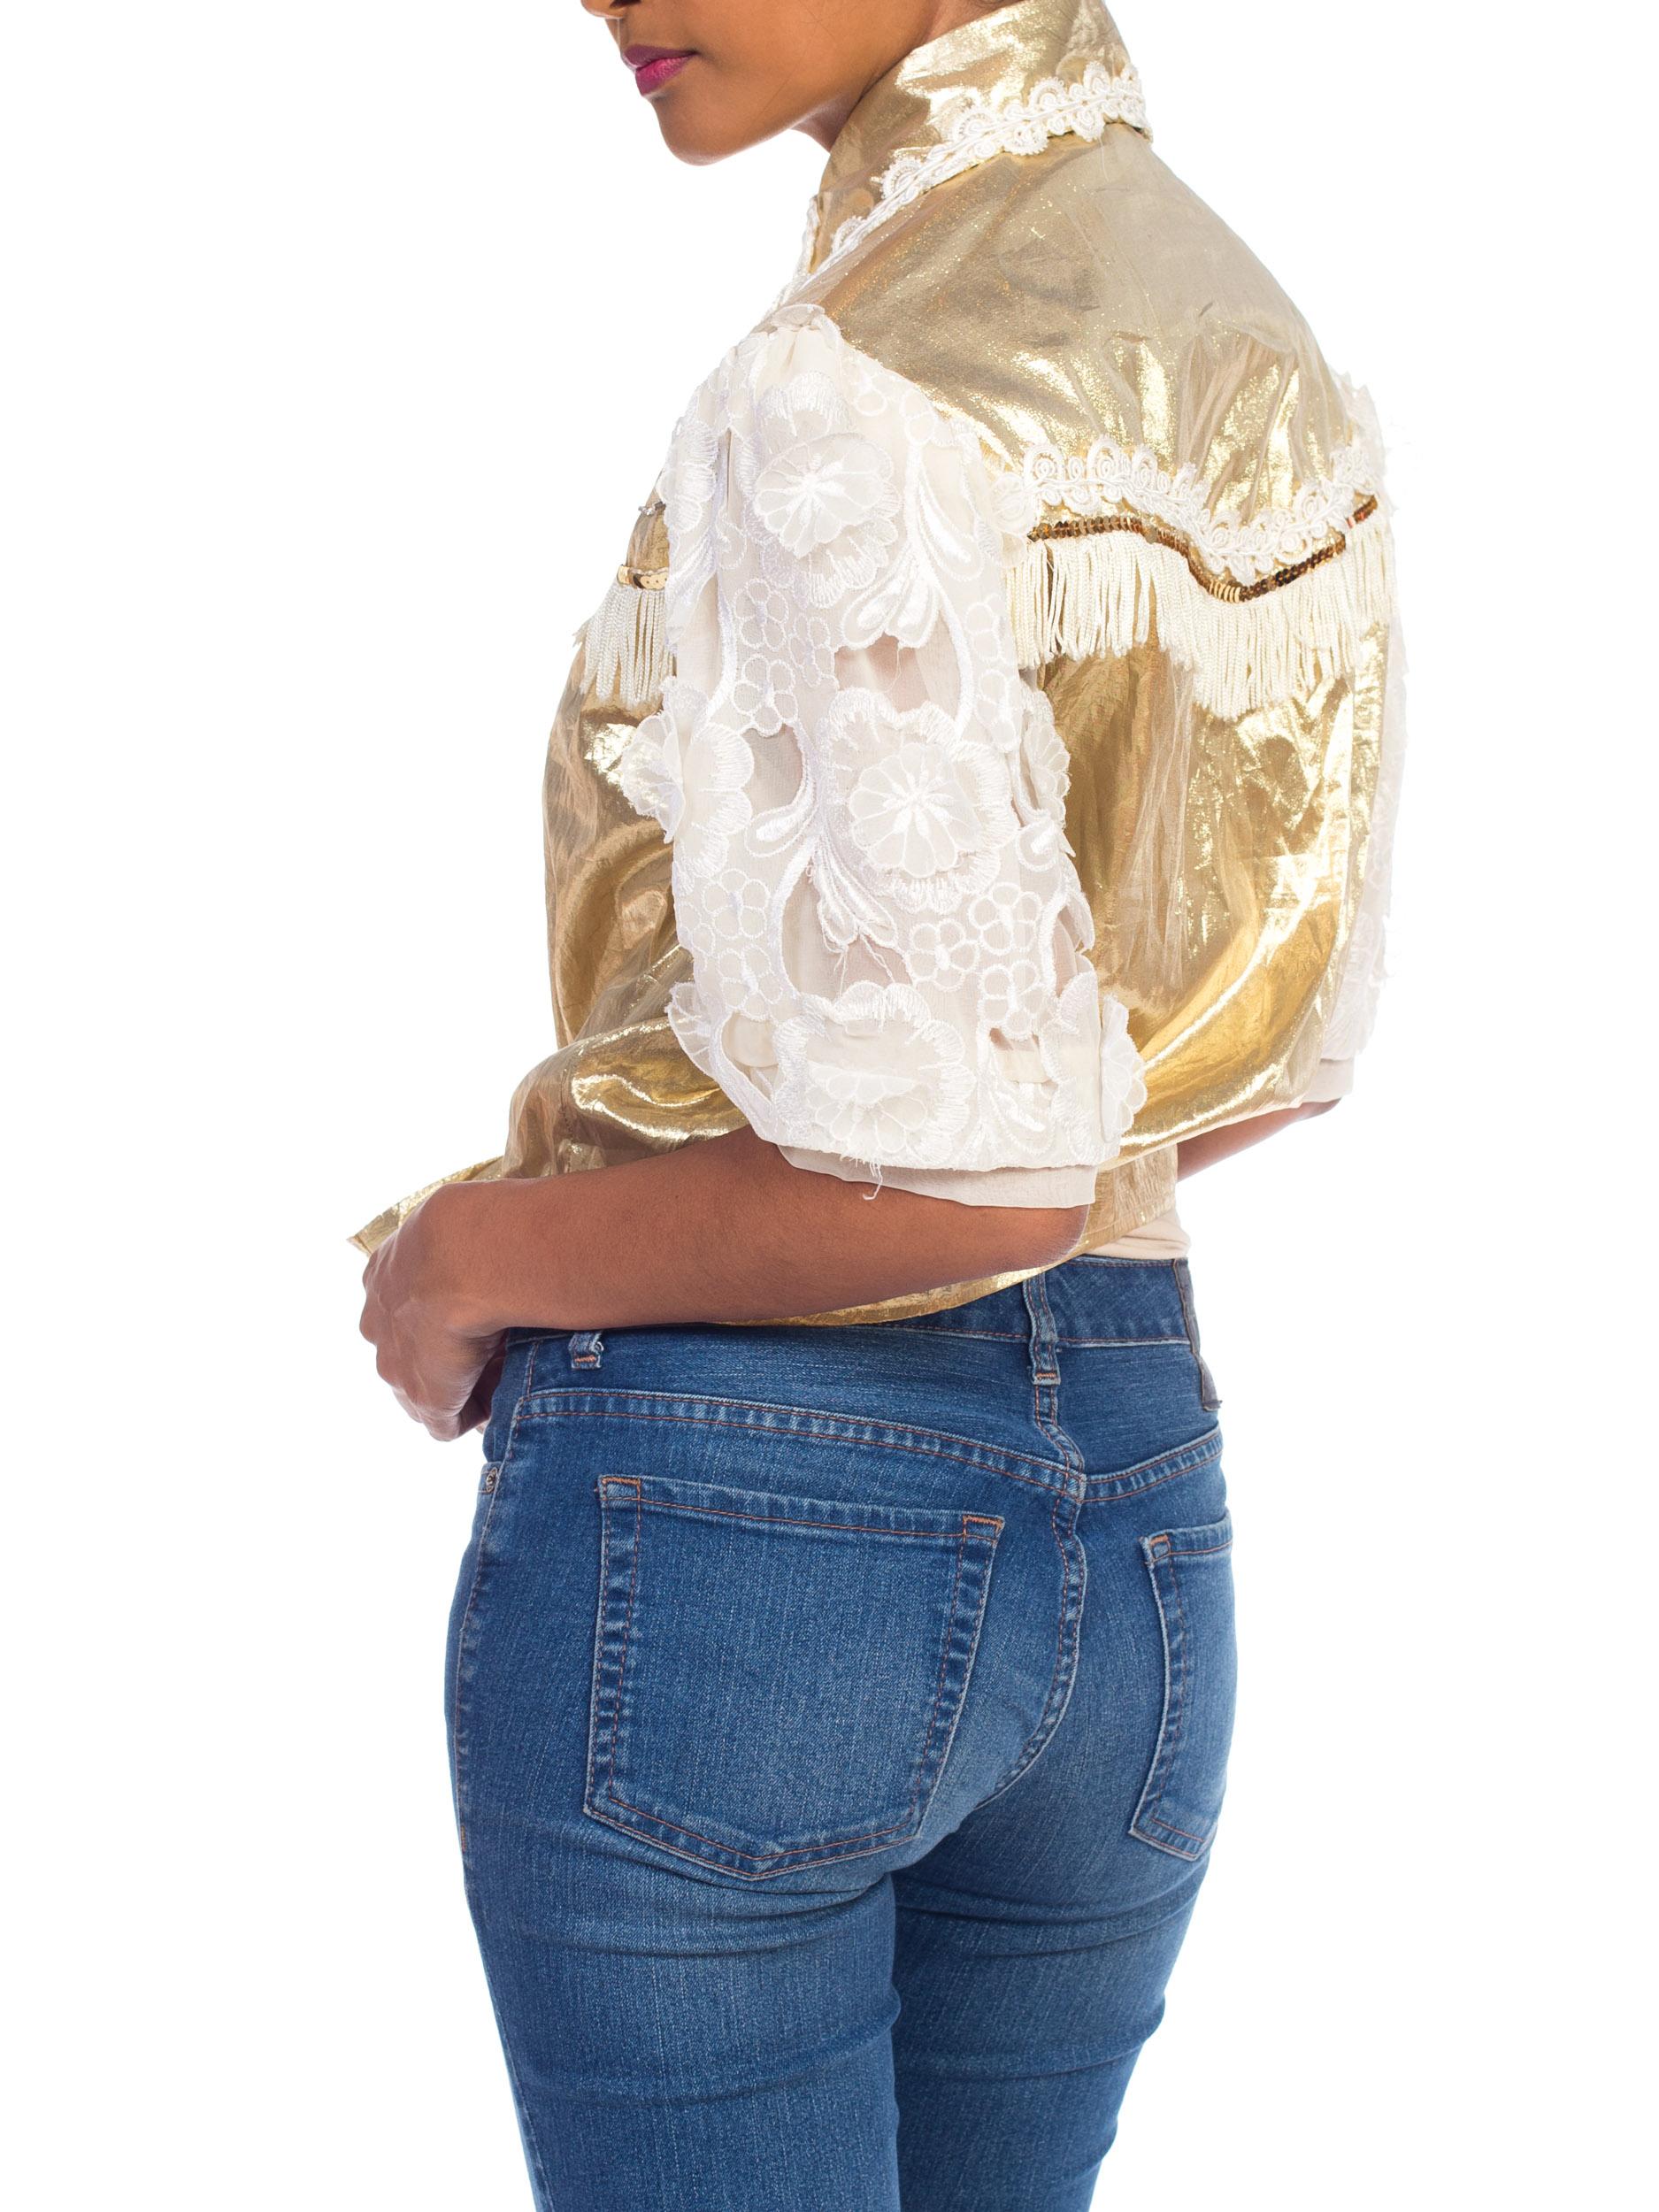 Gold Lamé & Lace Western Top with Fringe 1